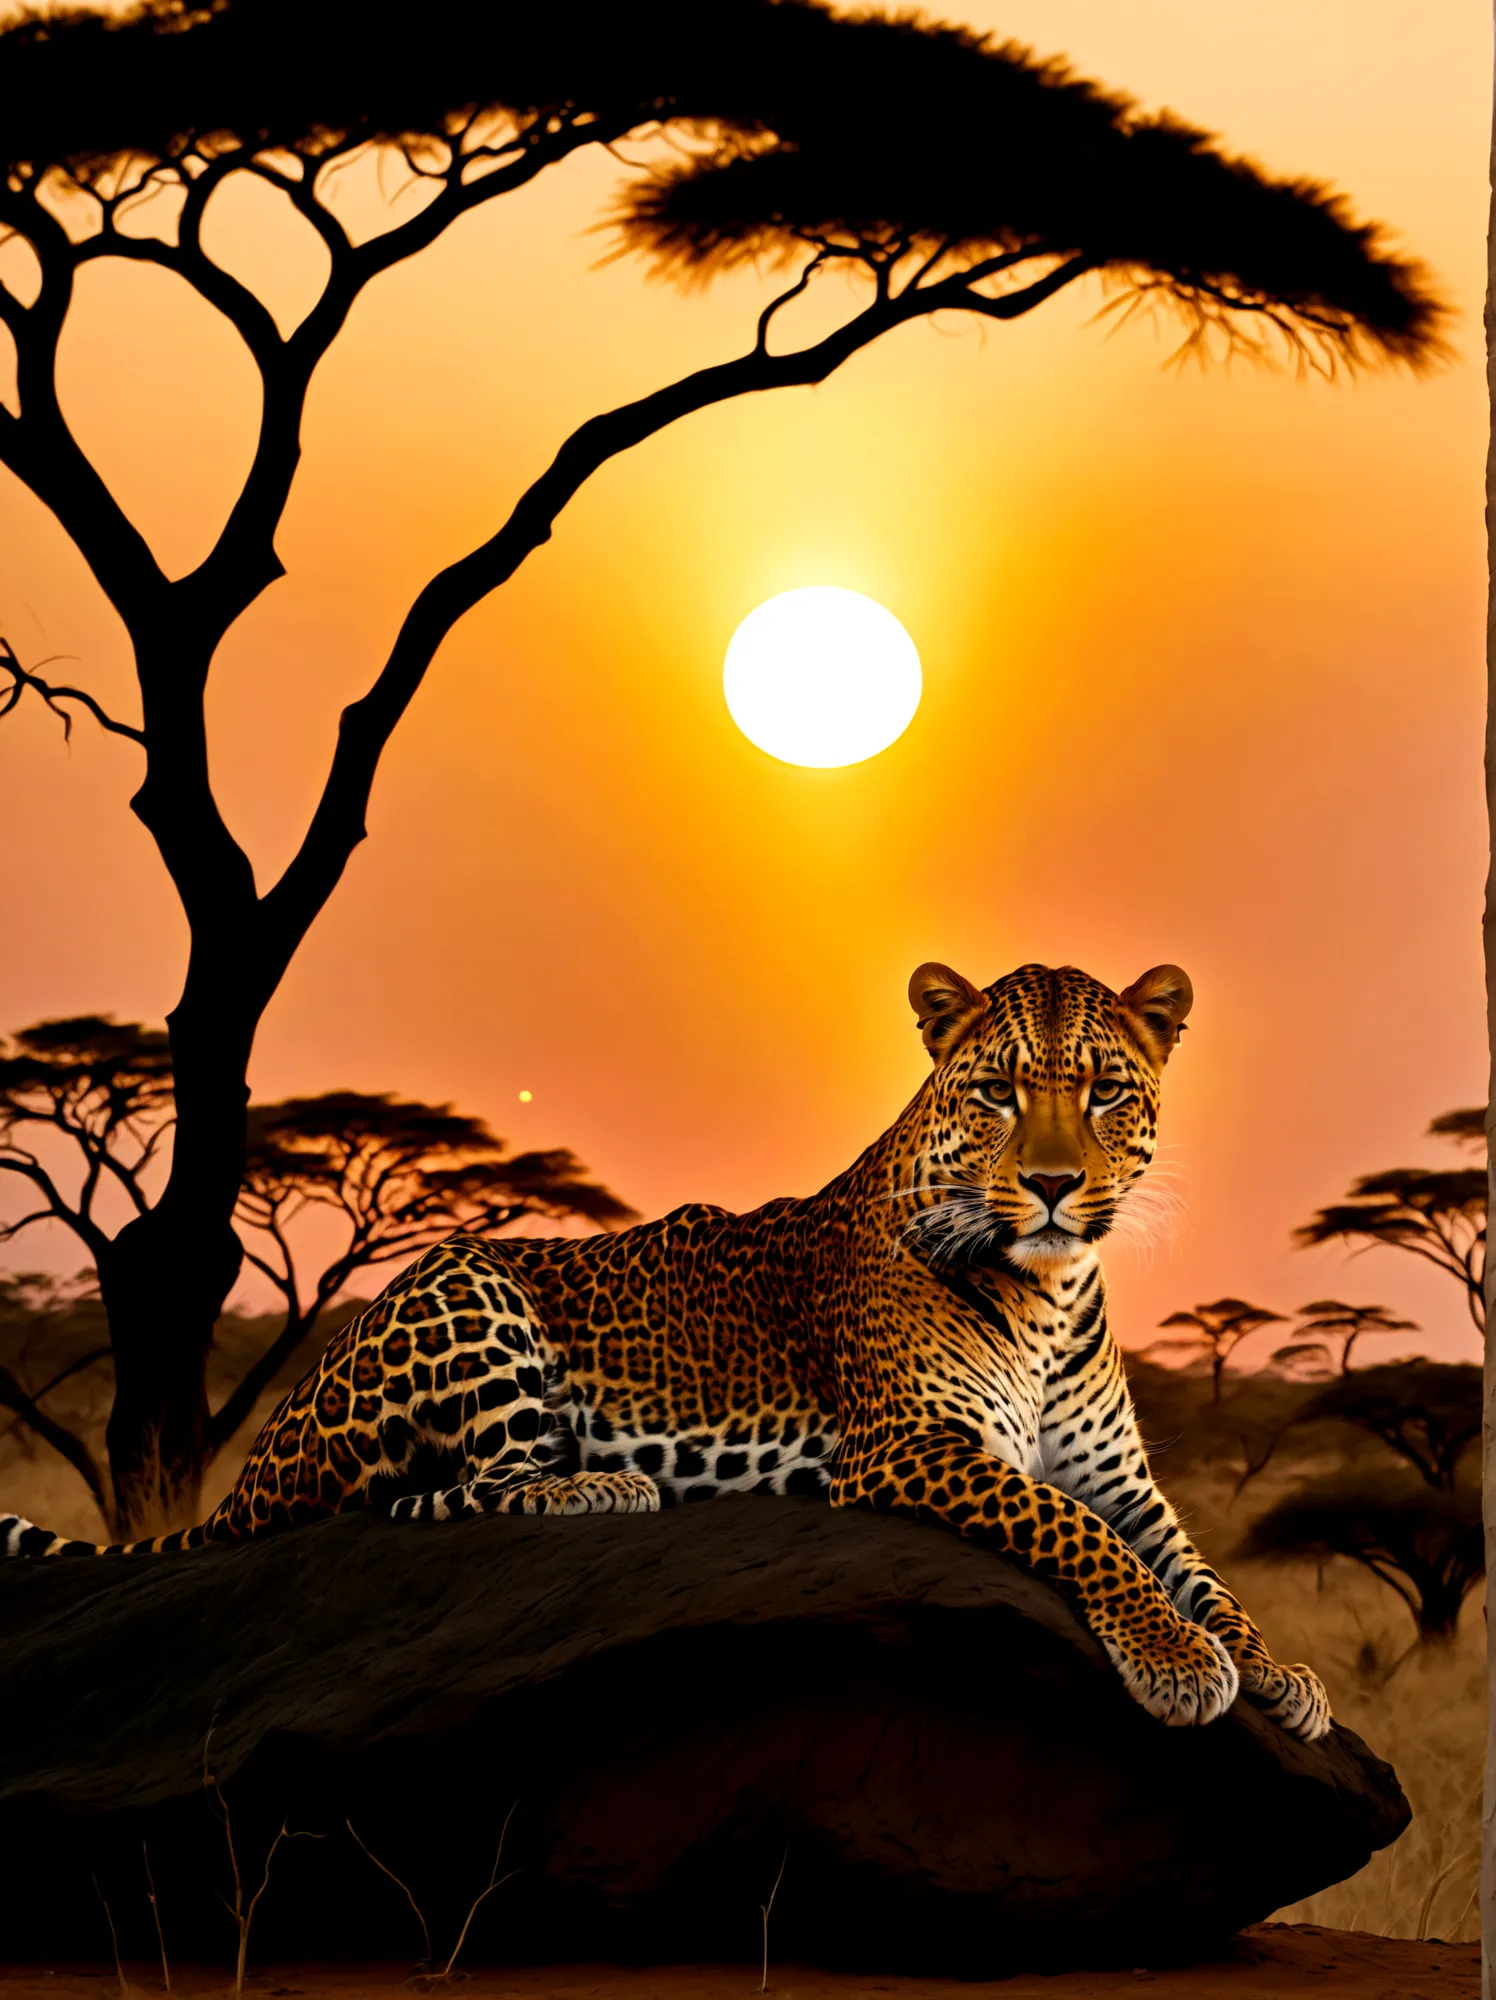 A leopard with a golden crown resting on its head, majestically poised against the backdrop of a sunset in the Savannah. The cro...